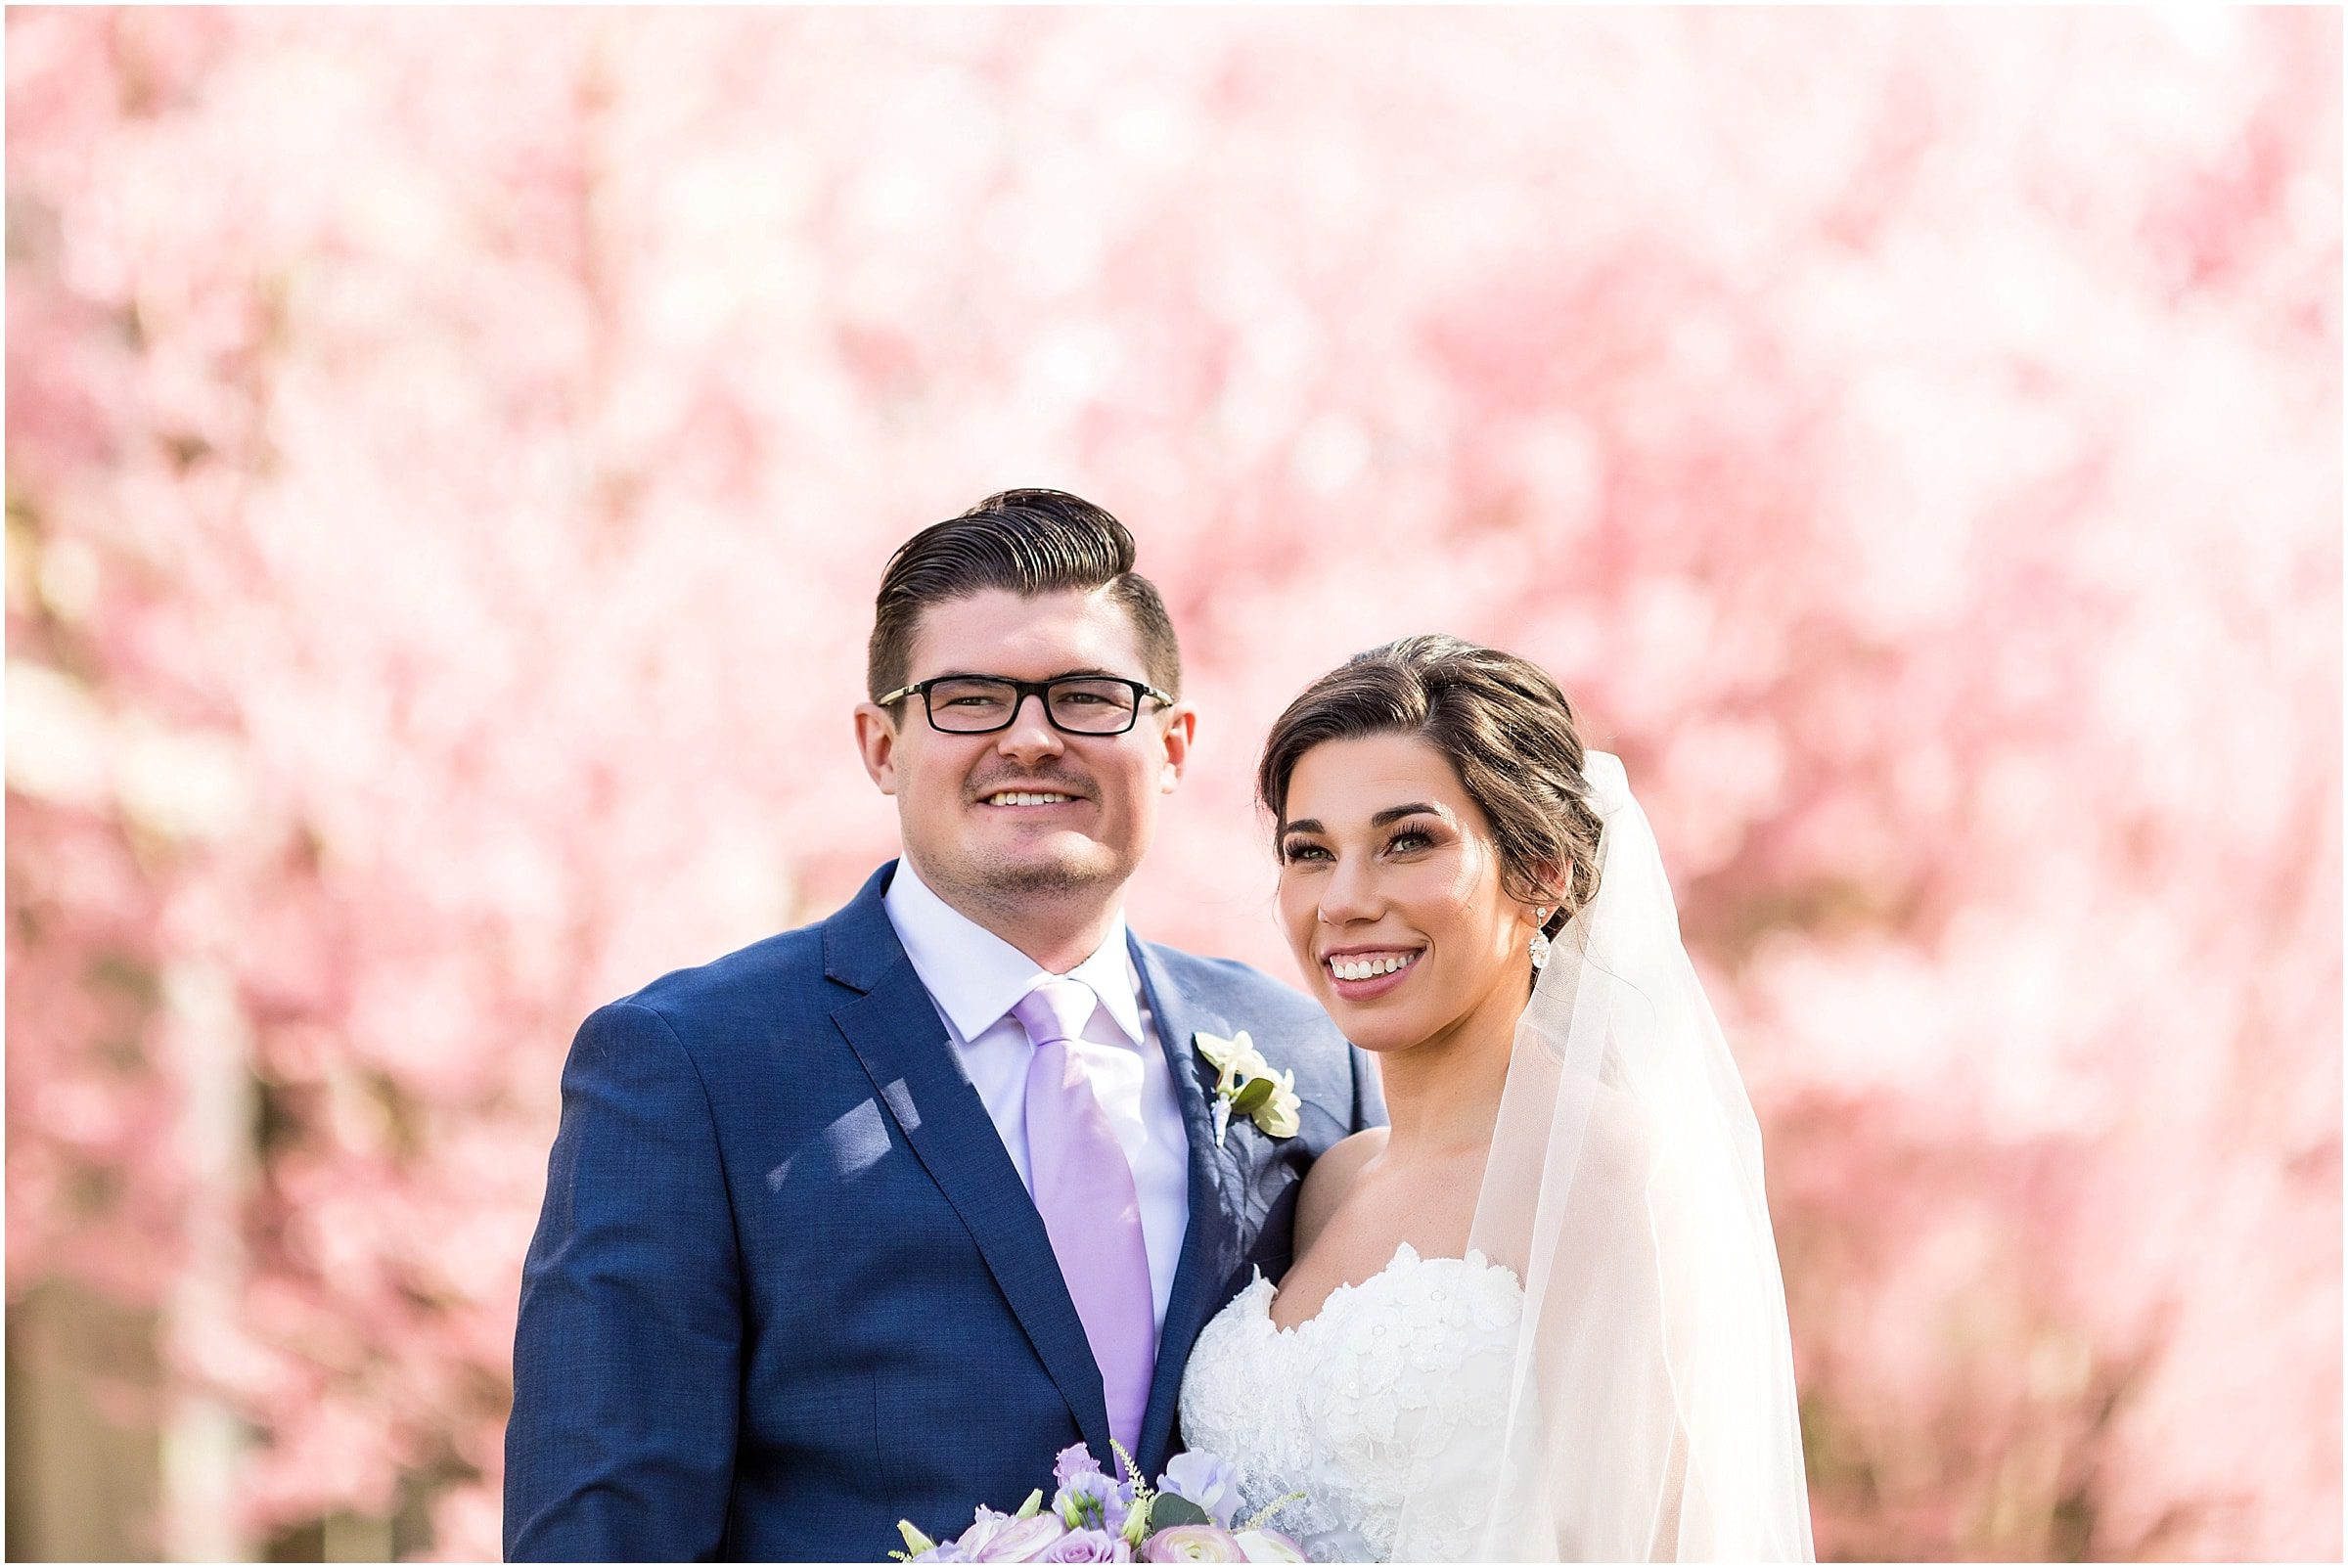 Bride and groom portraits with a backdrop of spring blossoms | Ashley Gerrity Photography www.ashleygerrityphotography.com